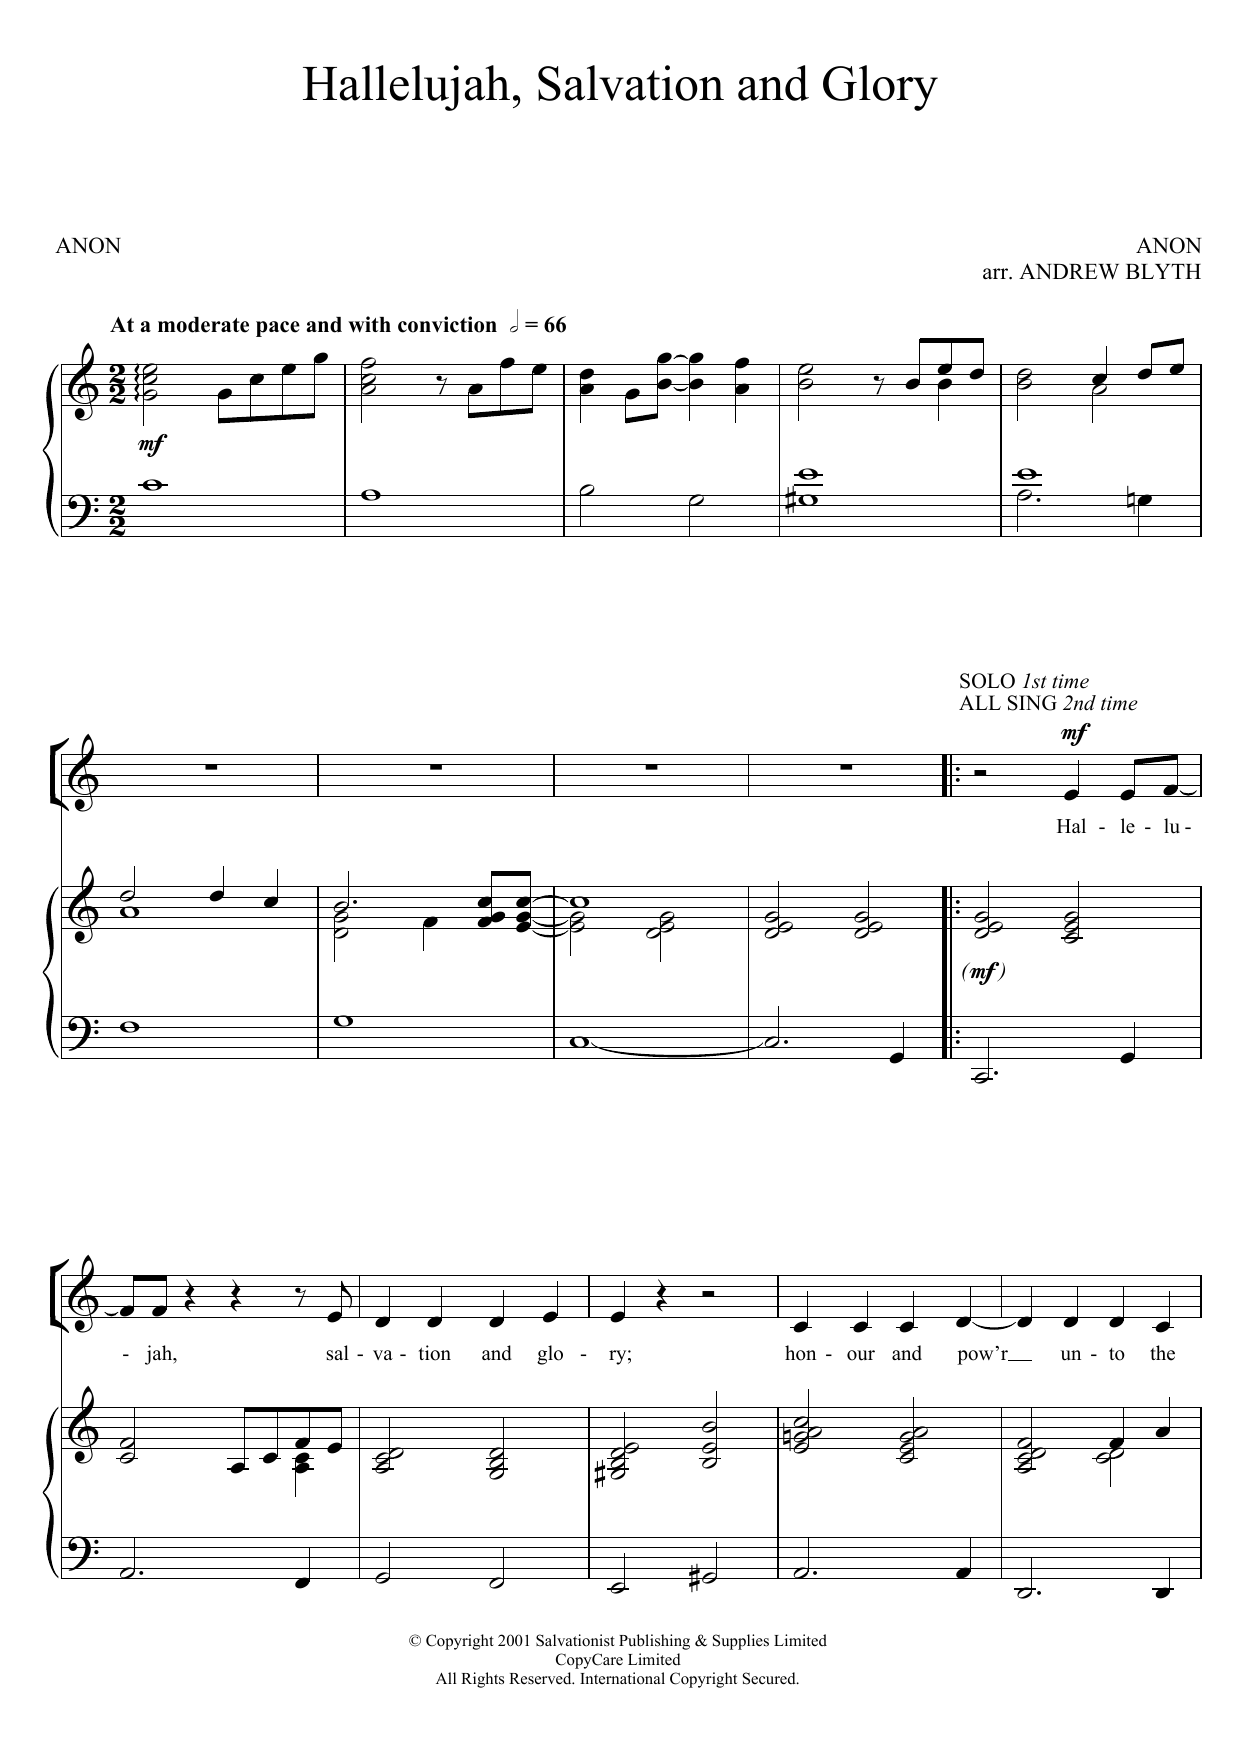 Download The Salvation Army Hallelujah, Salvation And Glory Sheet Music